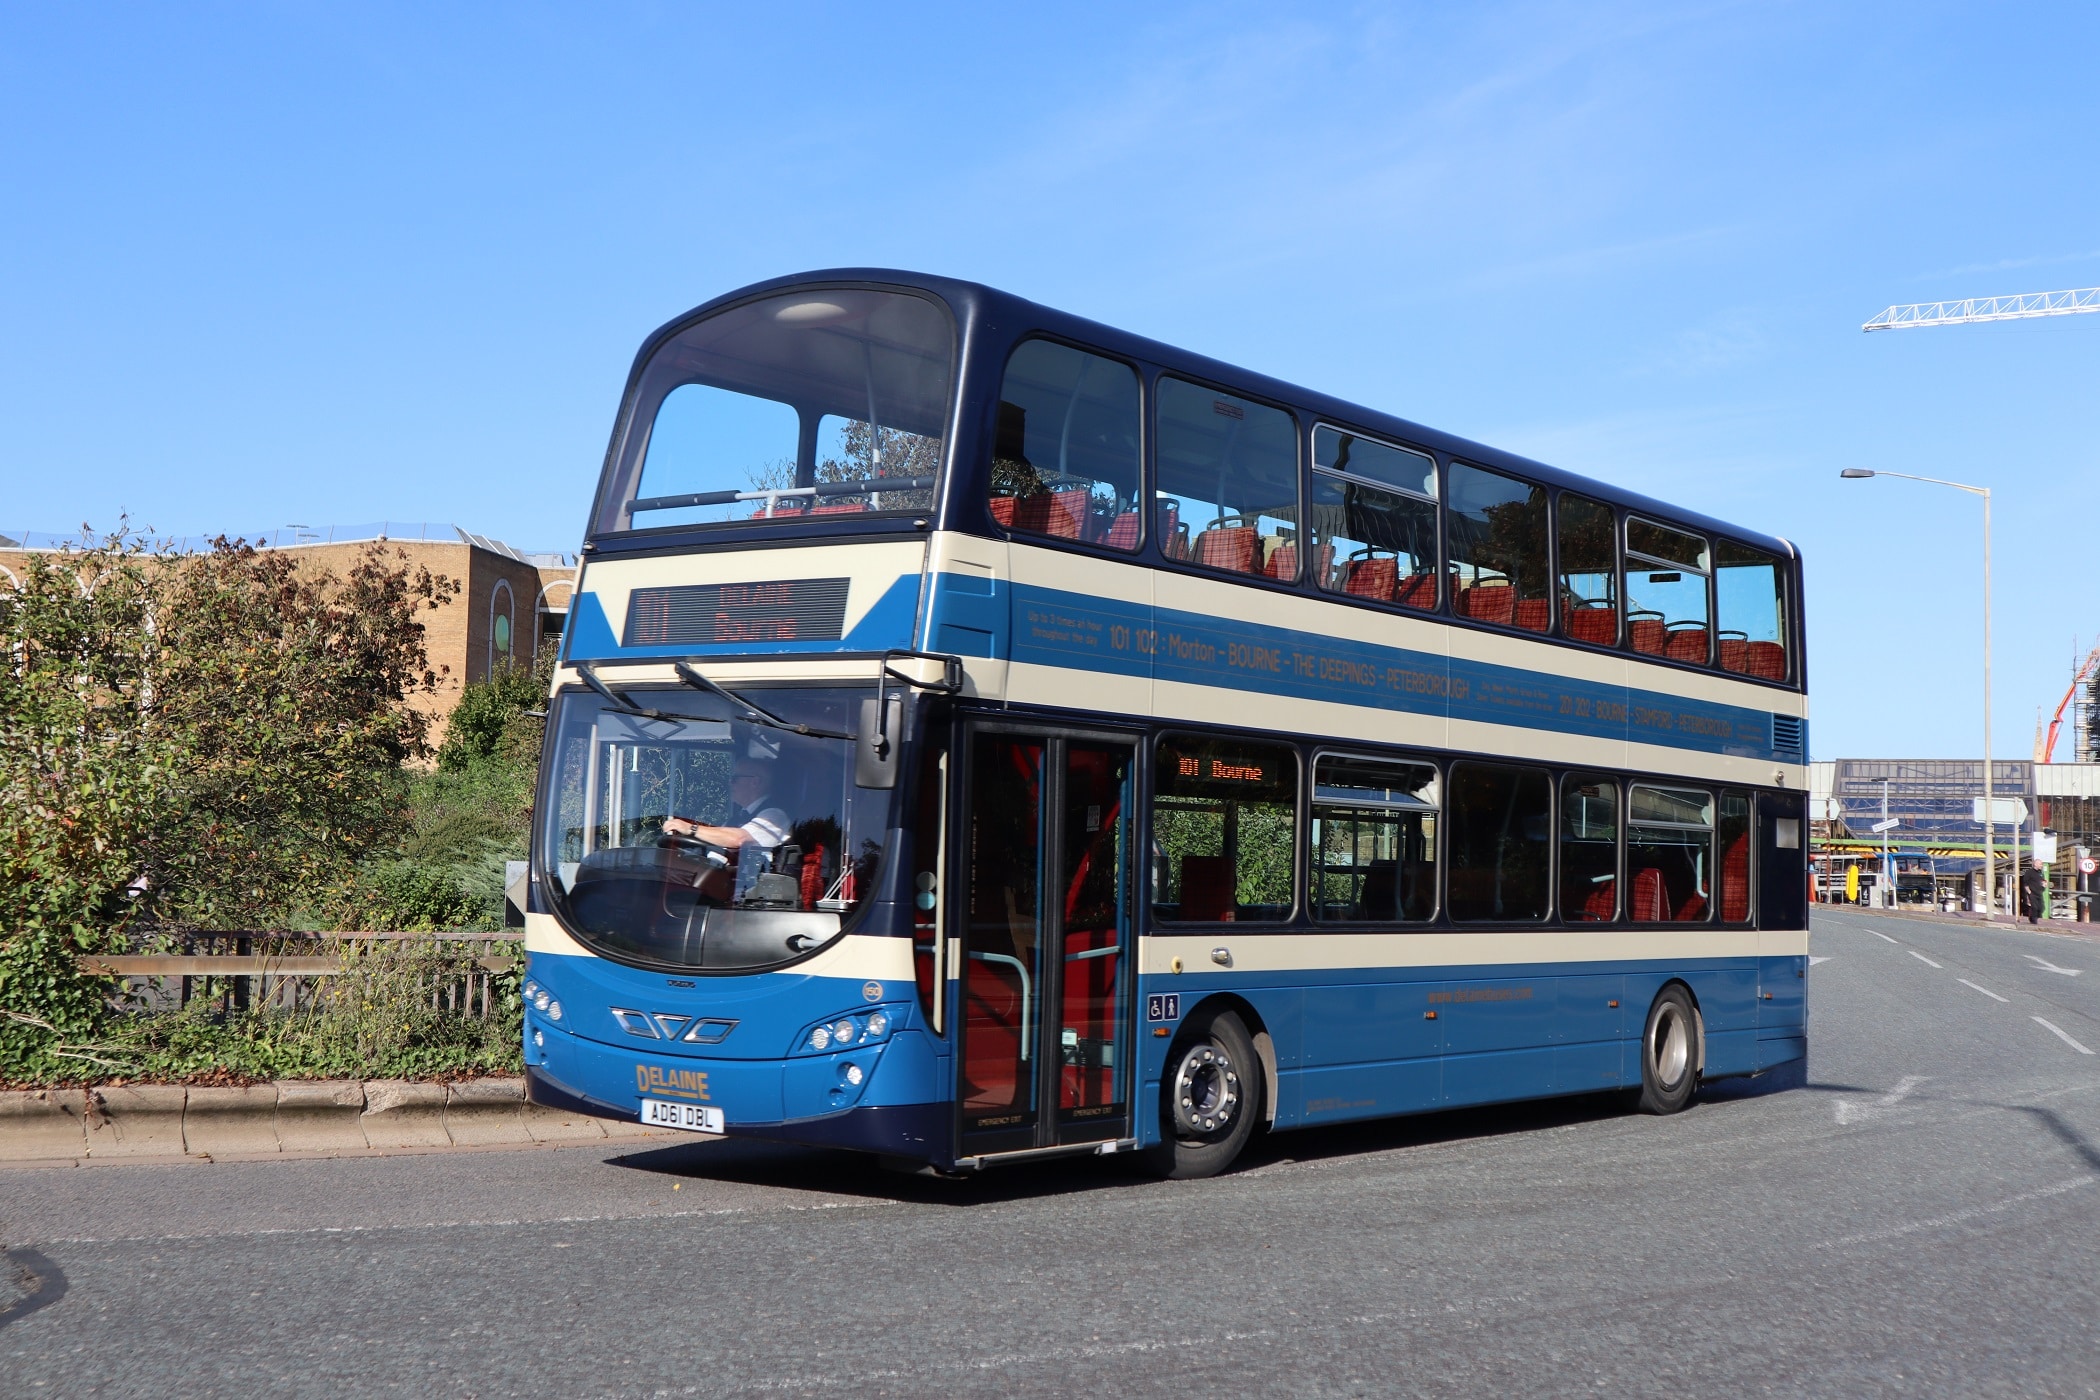 Transport Focus Bus User Weekly Survey launched